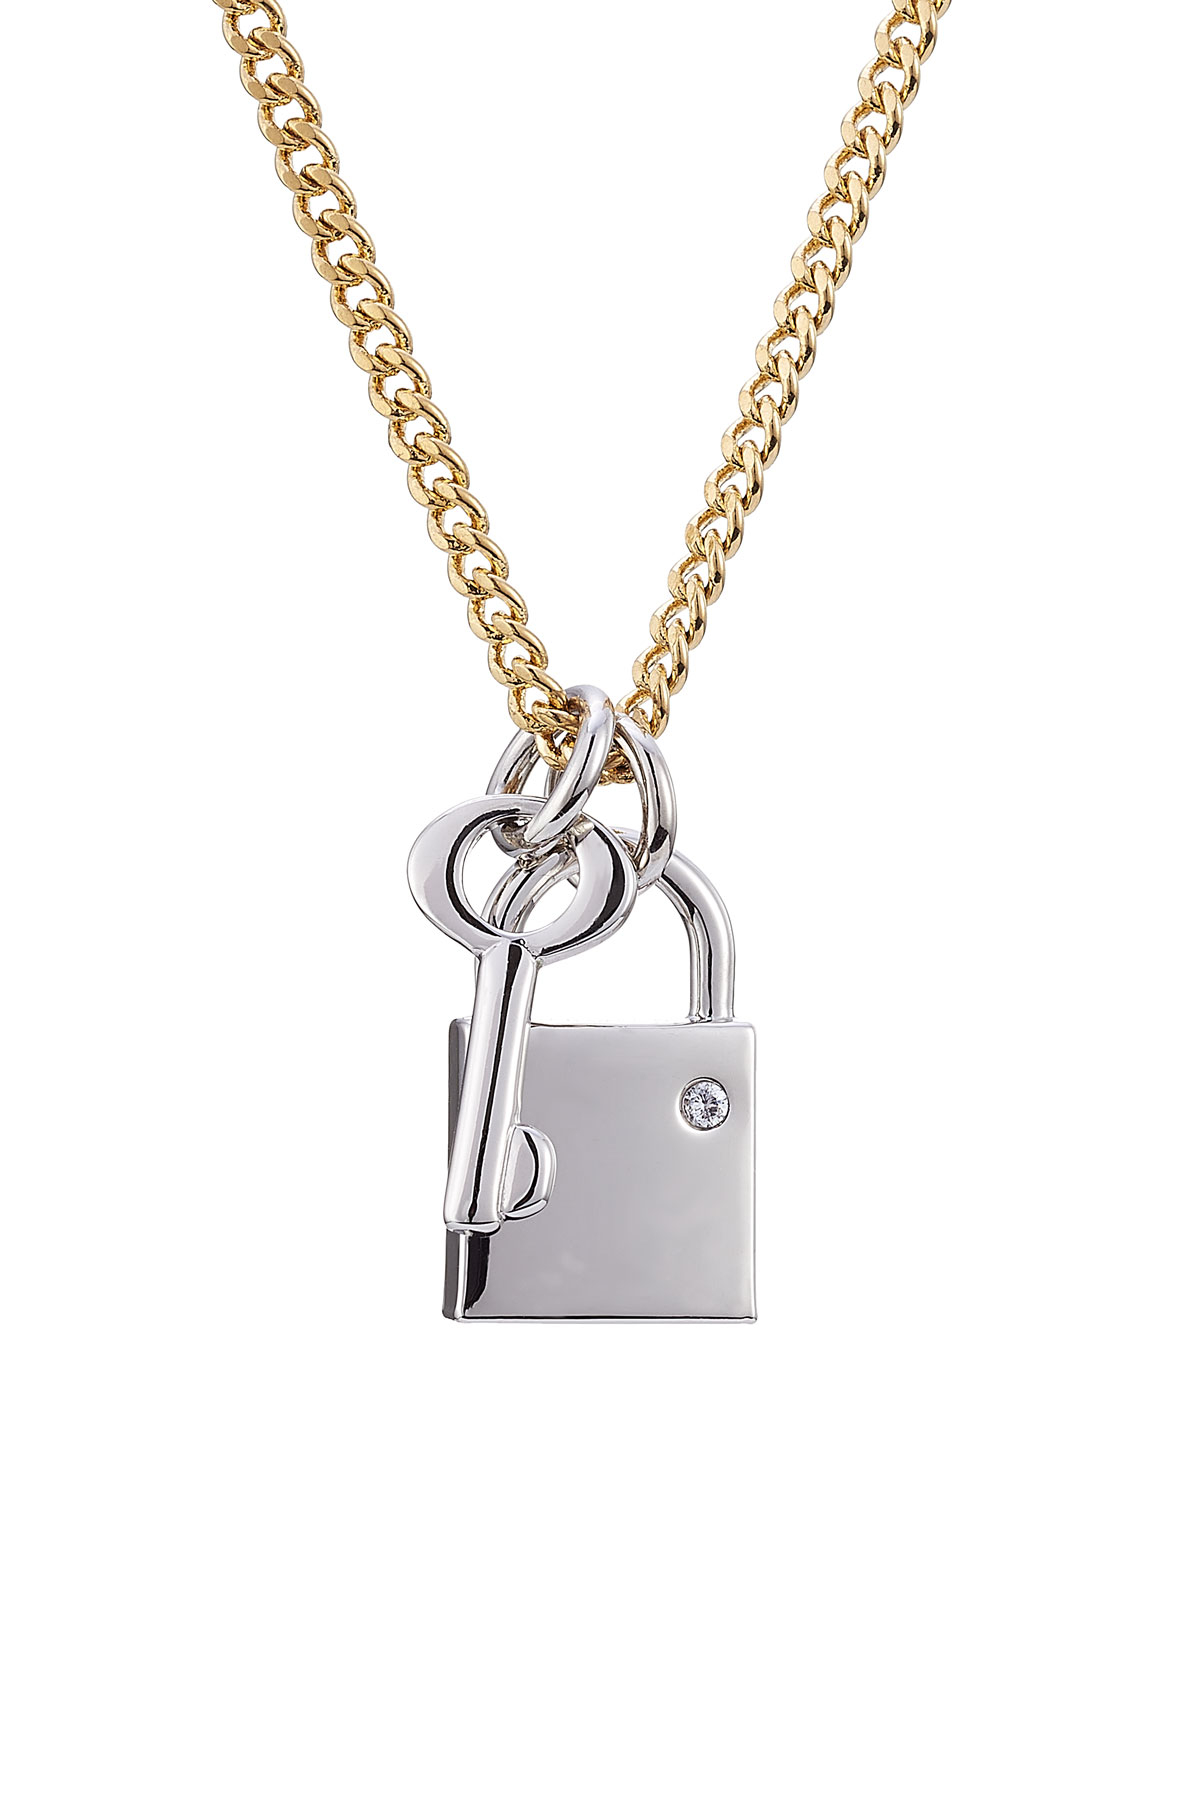 Lyst - Marc by marc jacobs Lock & Key Necklace - Multicolor in Metallic